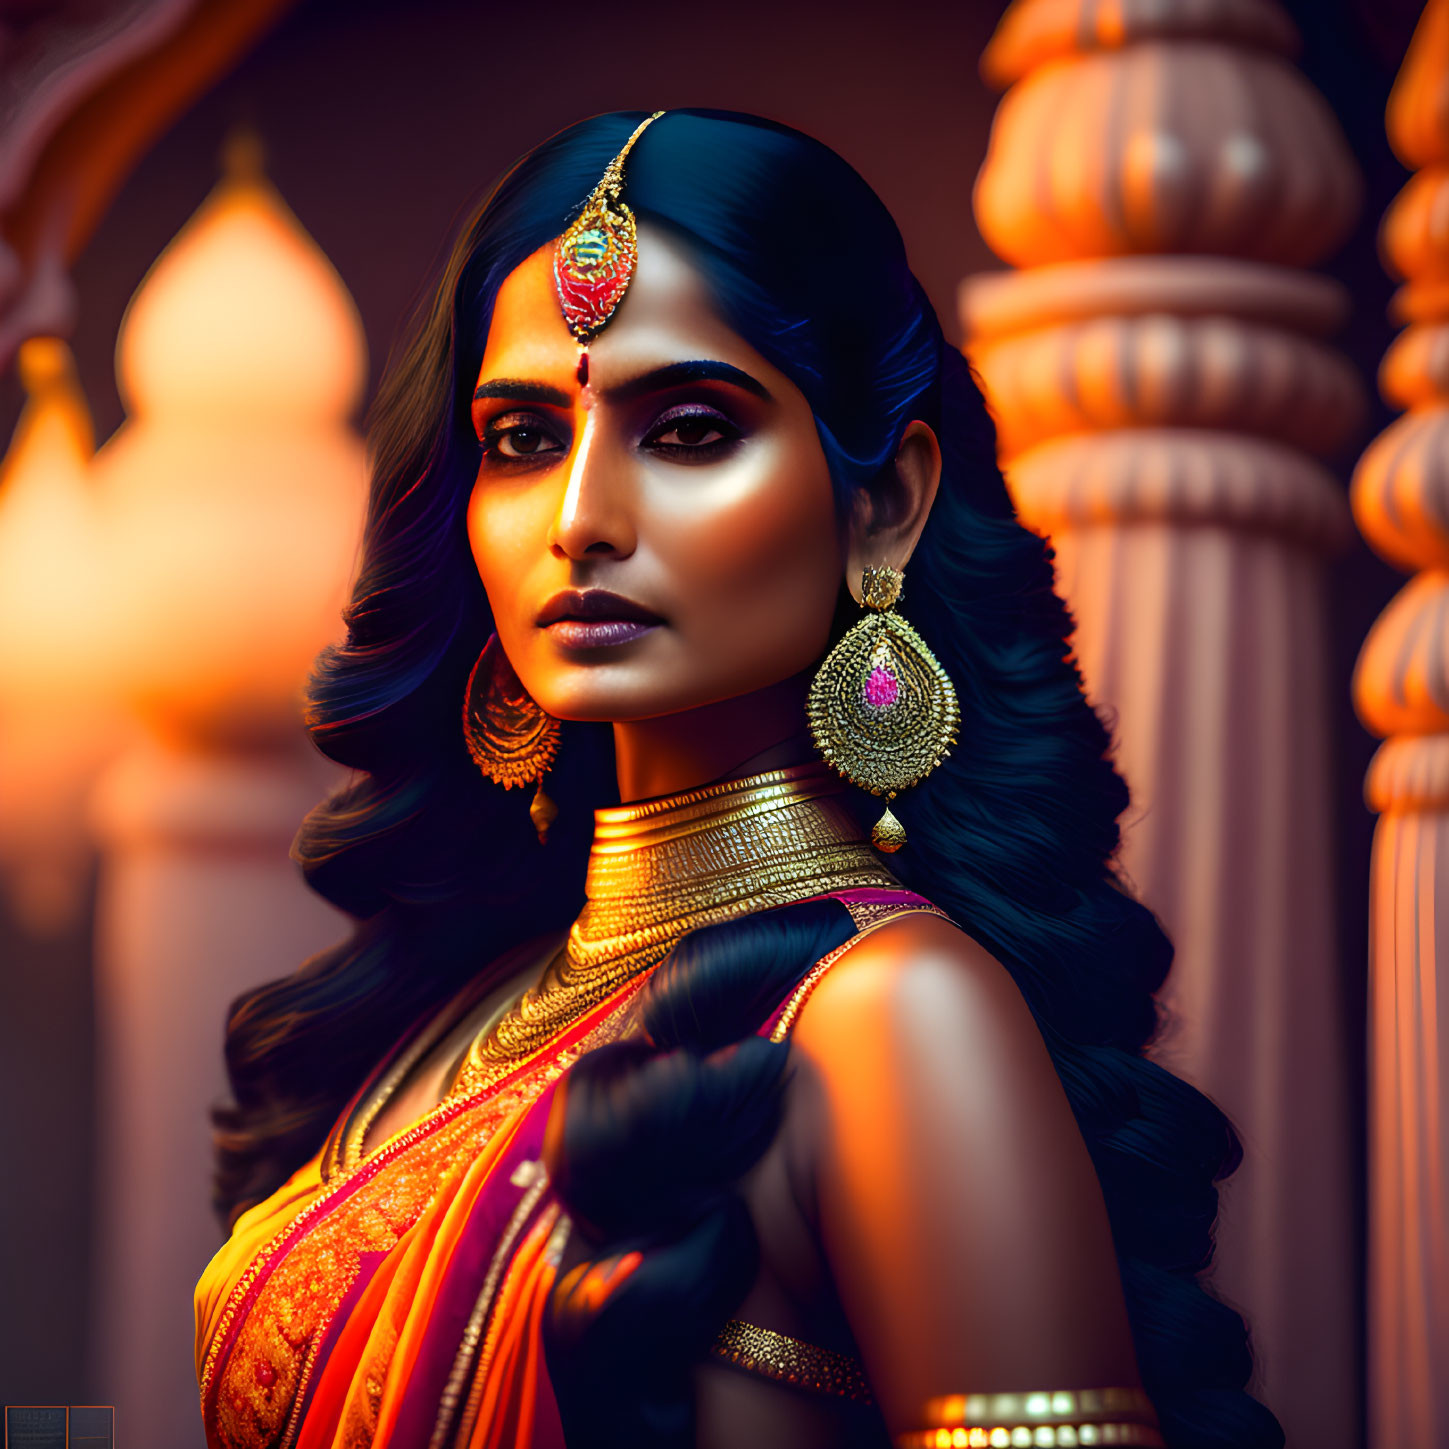 Traditional Indian Attire Woman Poses with Intense Gaze